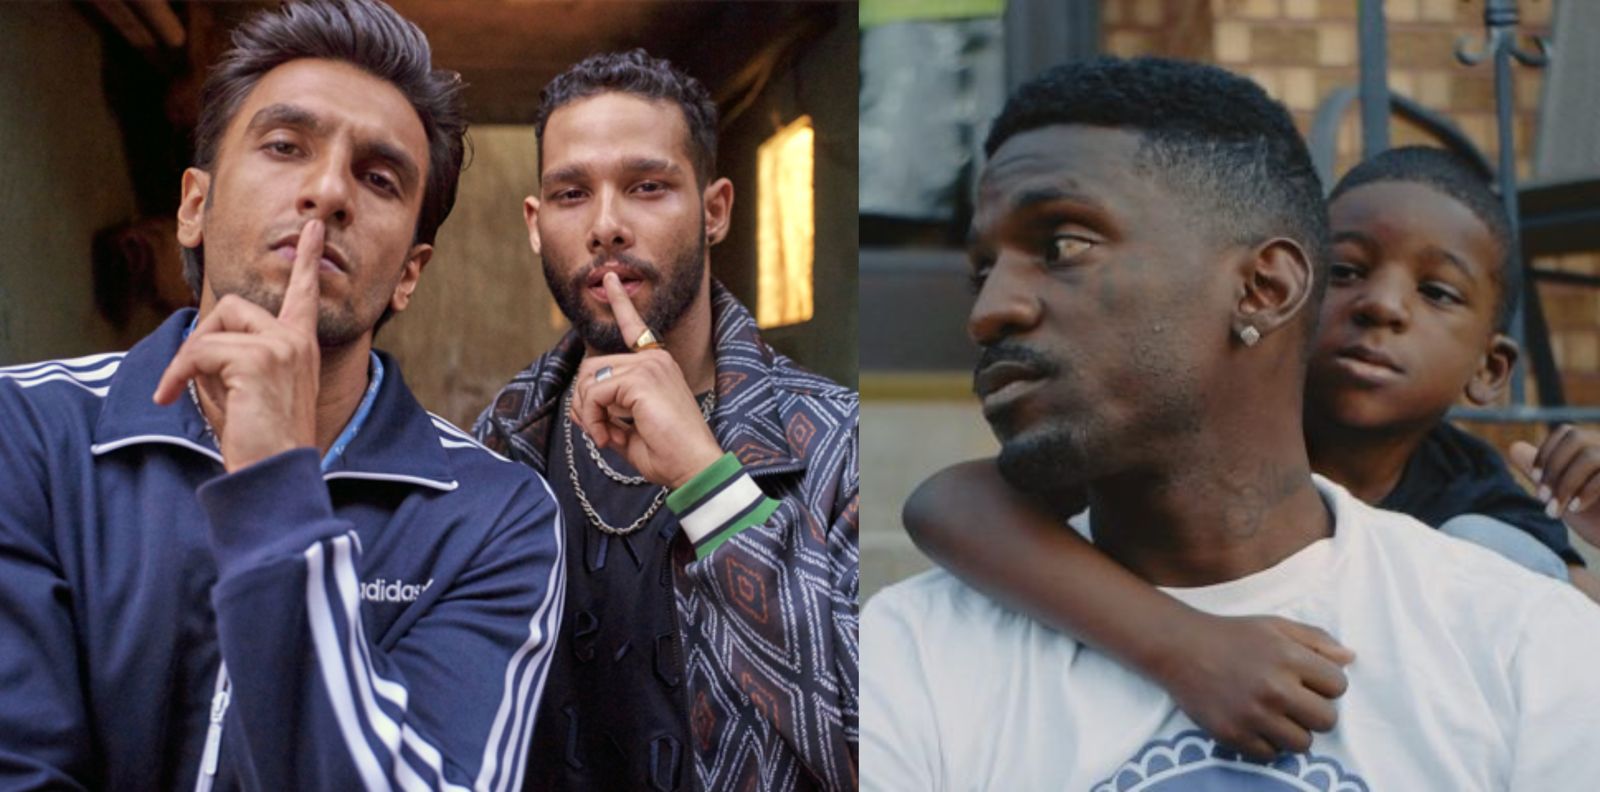 Oscars 2020: Gully Boy Might Be Out But Indians Can Still Root For St. Louis Superman To Bring Home The Award